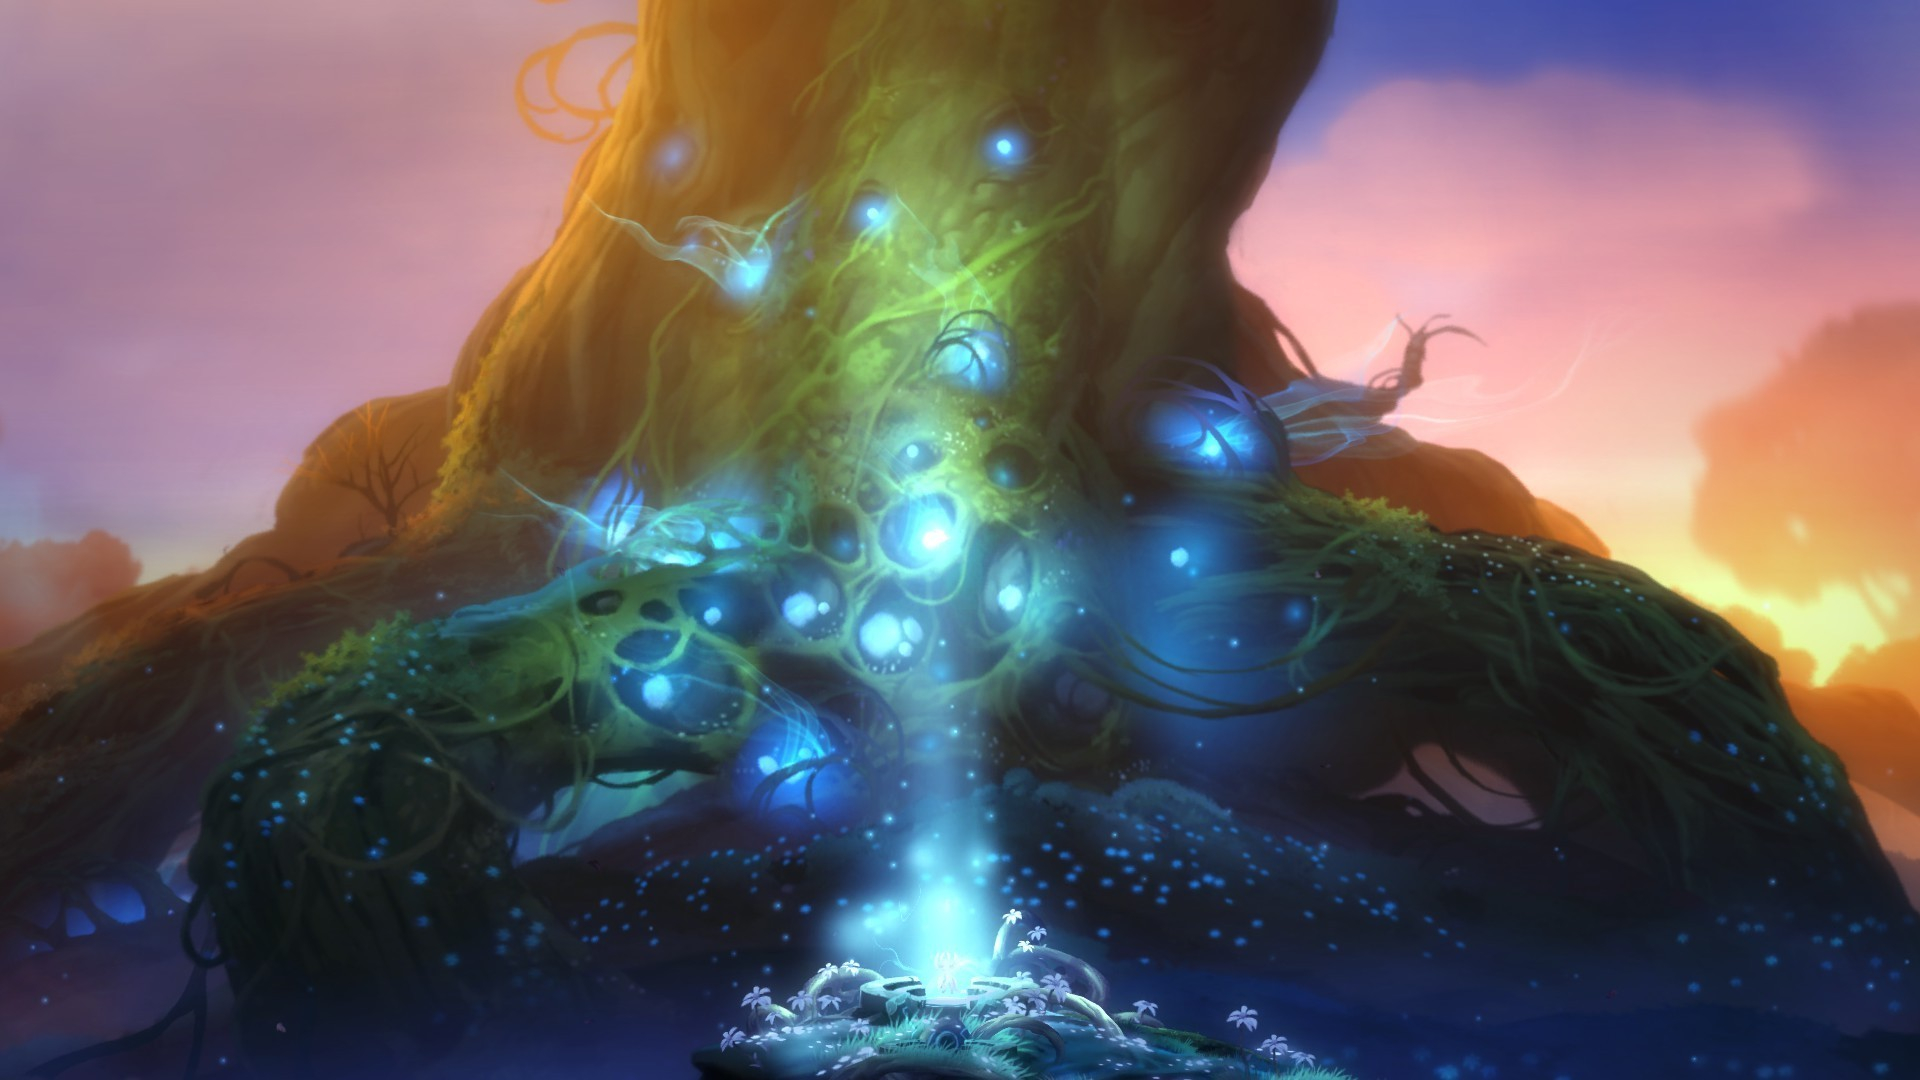 1920x1080 Wallpaper : fantasy art, glowing, roots, Ori and the Blind Forest, screenshot, px, computer wallpaper, special effects, geological phenomenon CoolWallpapers 610972 HD Wallpapers